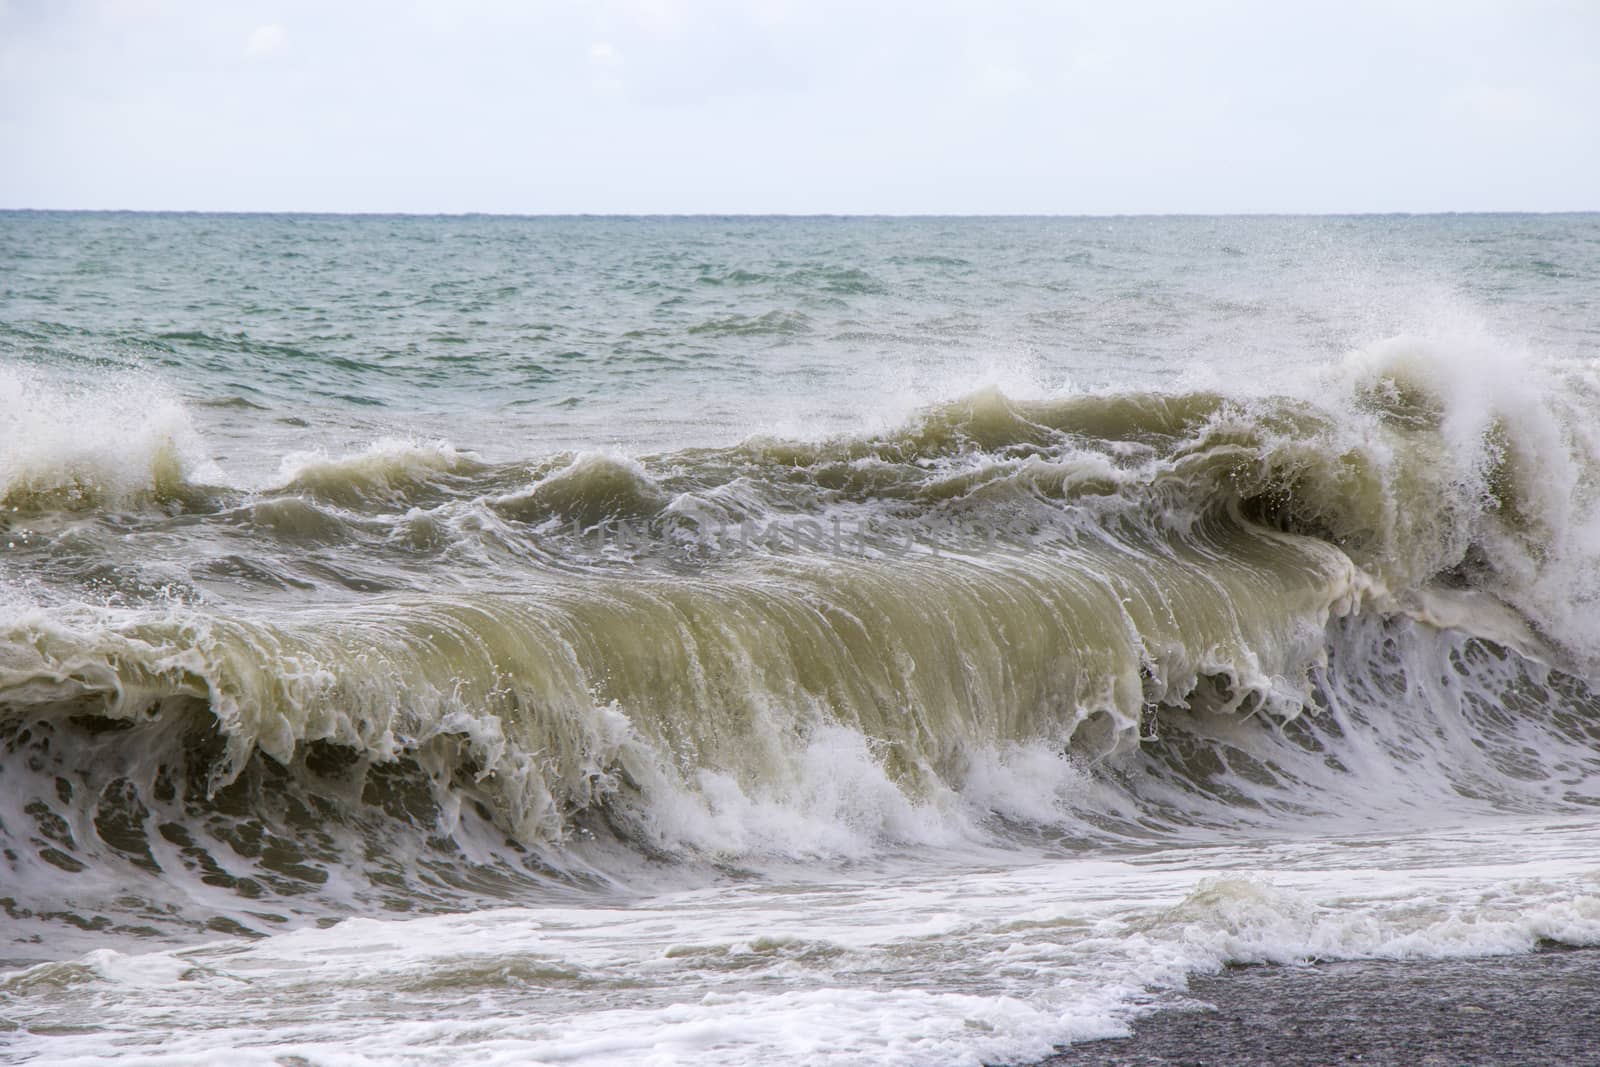 Stormy weather, waves and splashes in Batumi, Georgia. Stormy Black sea. by Taidundua